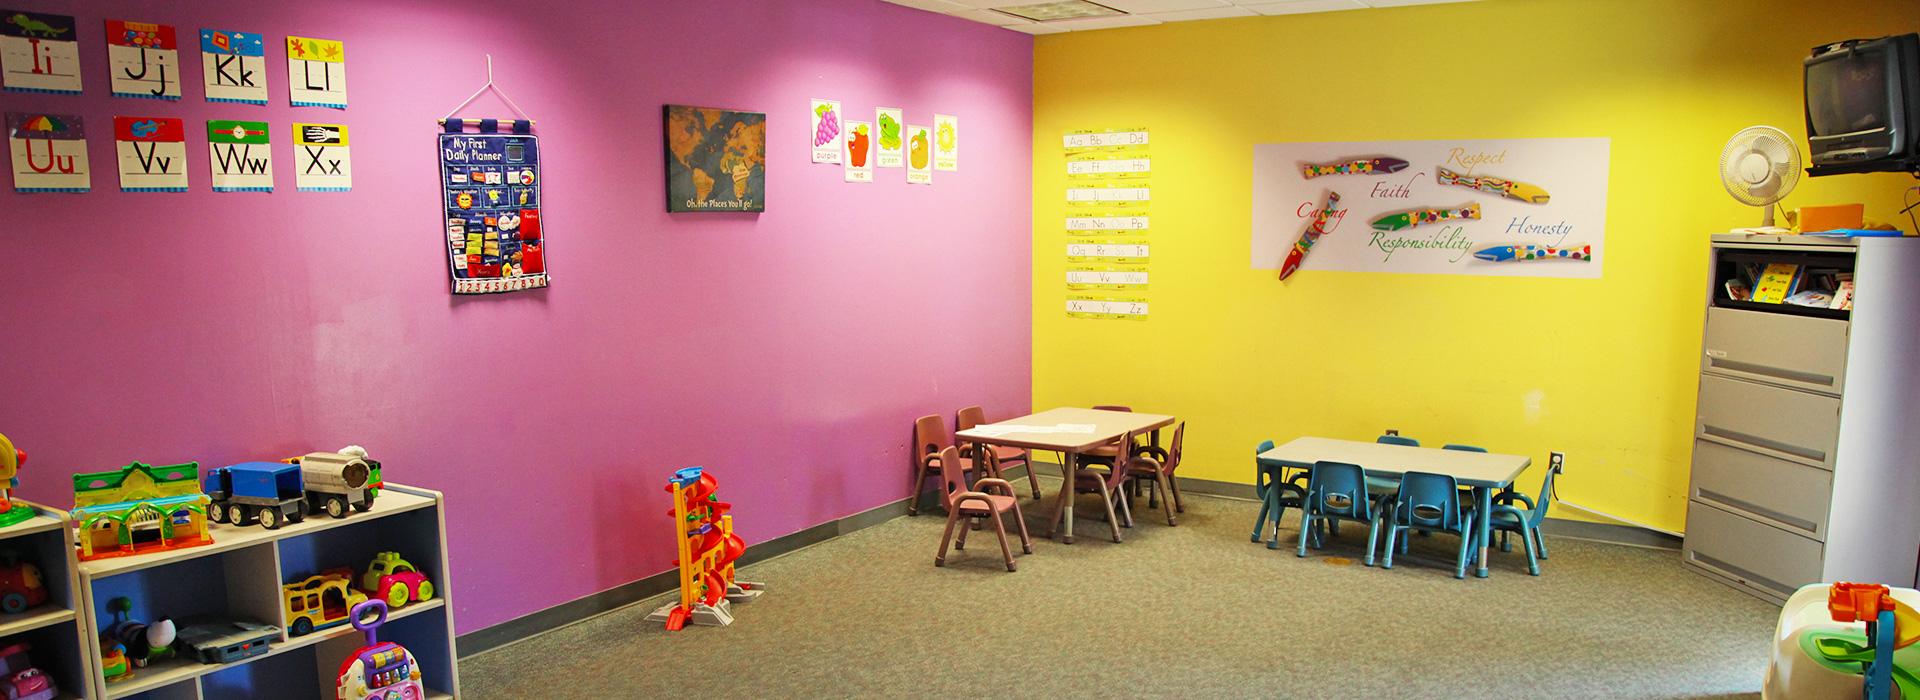 Taylor Bend Family YMCA child care room